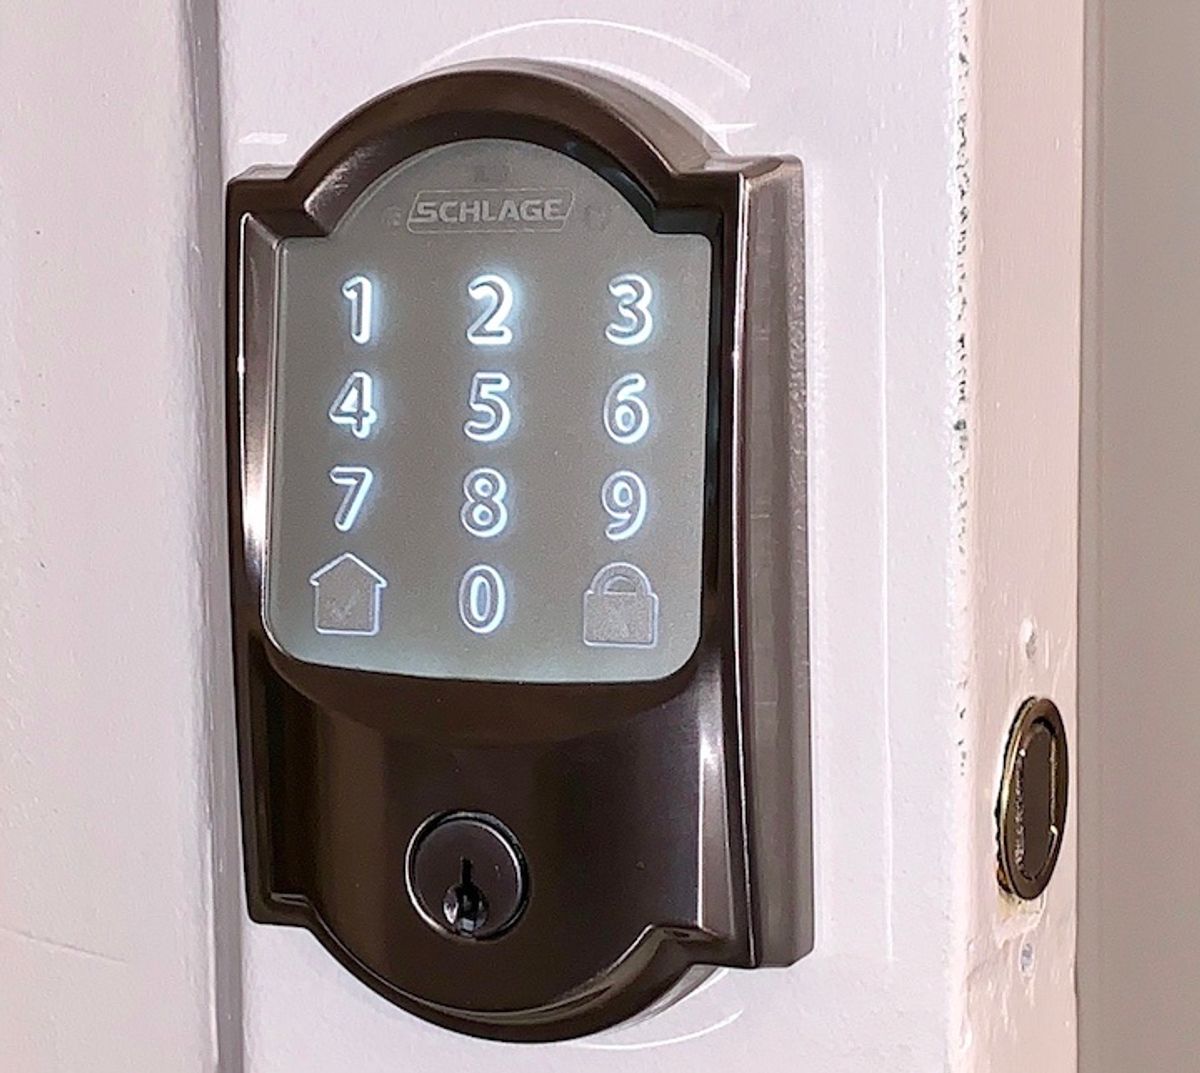 How To Reset Schlage Lock To Factory Settings